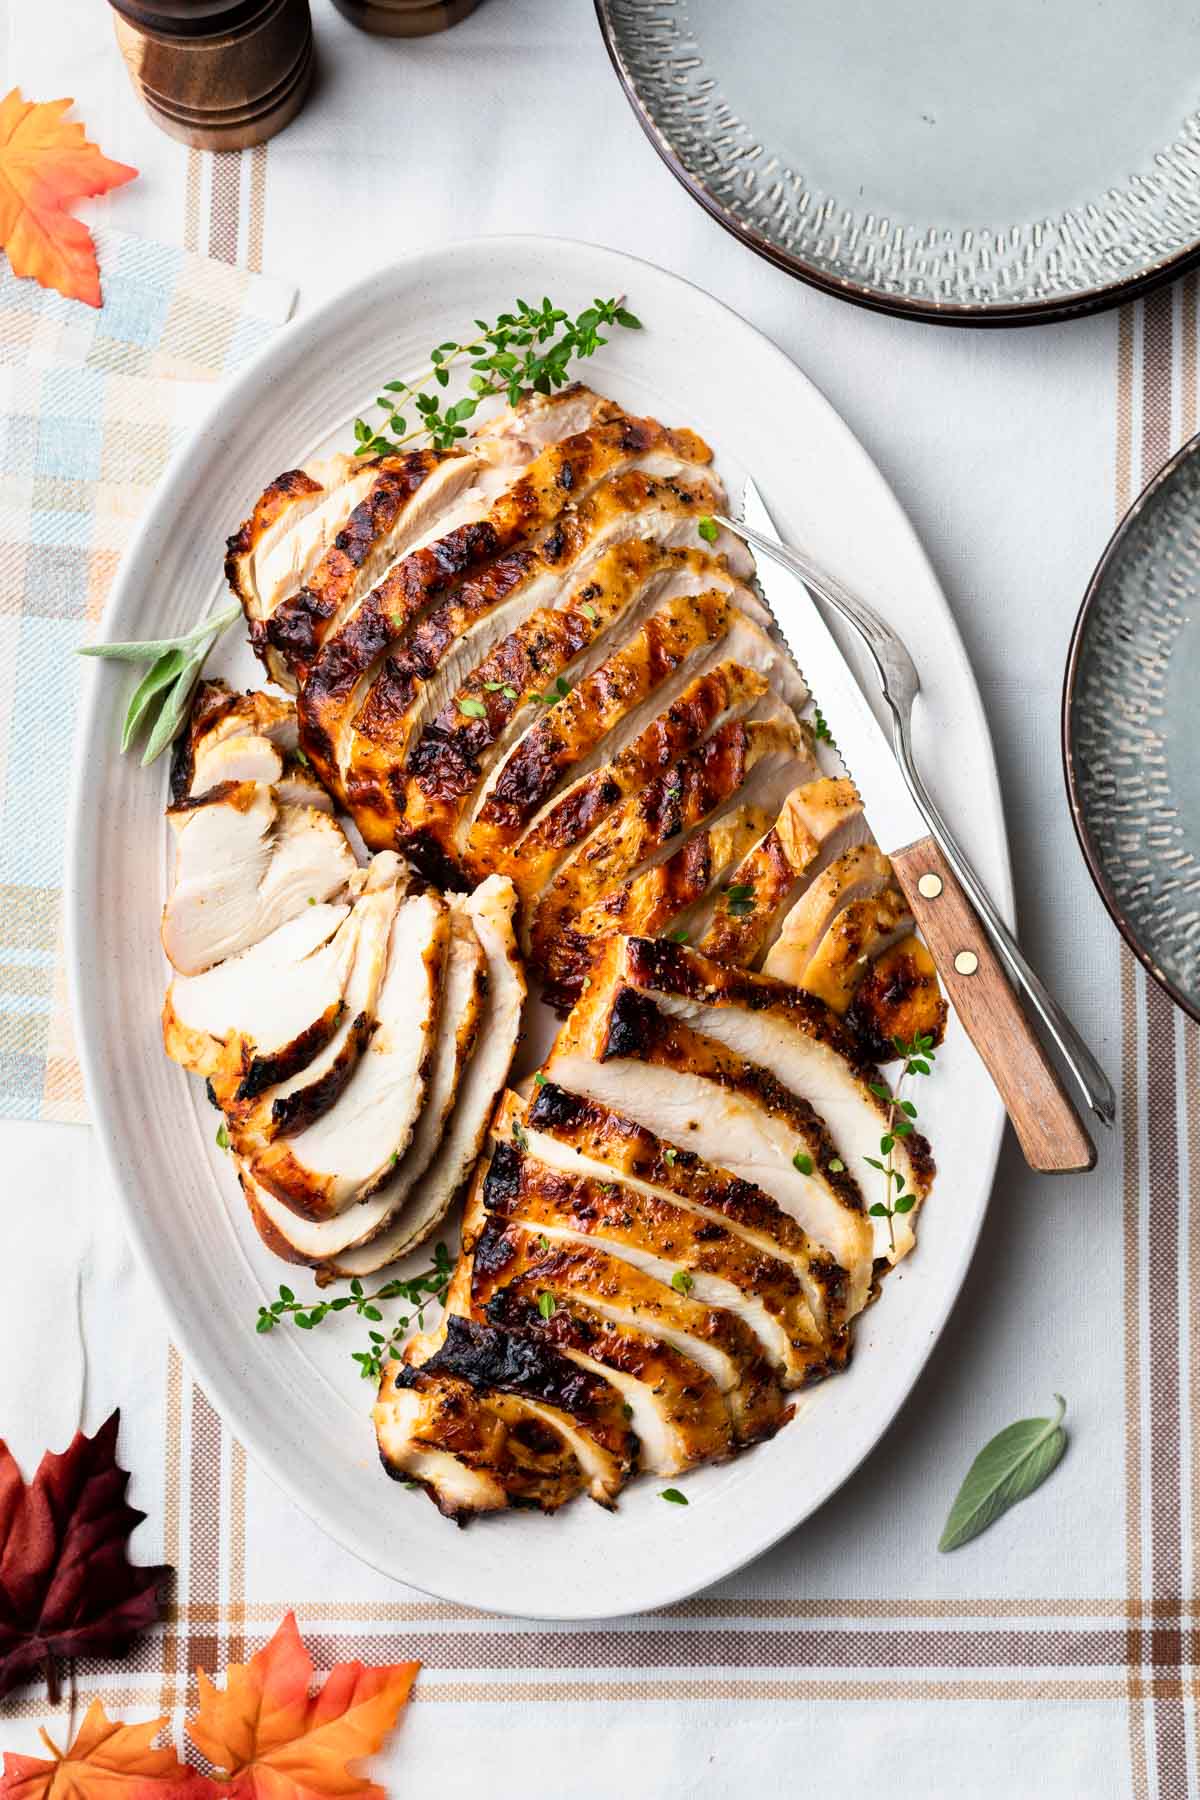 Overhead shot of grilled turkey breast on a platter sliced and ready to serve, with a fork and knife resting on the platter